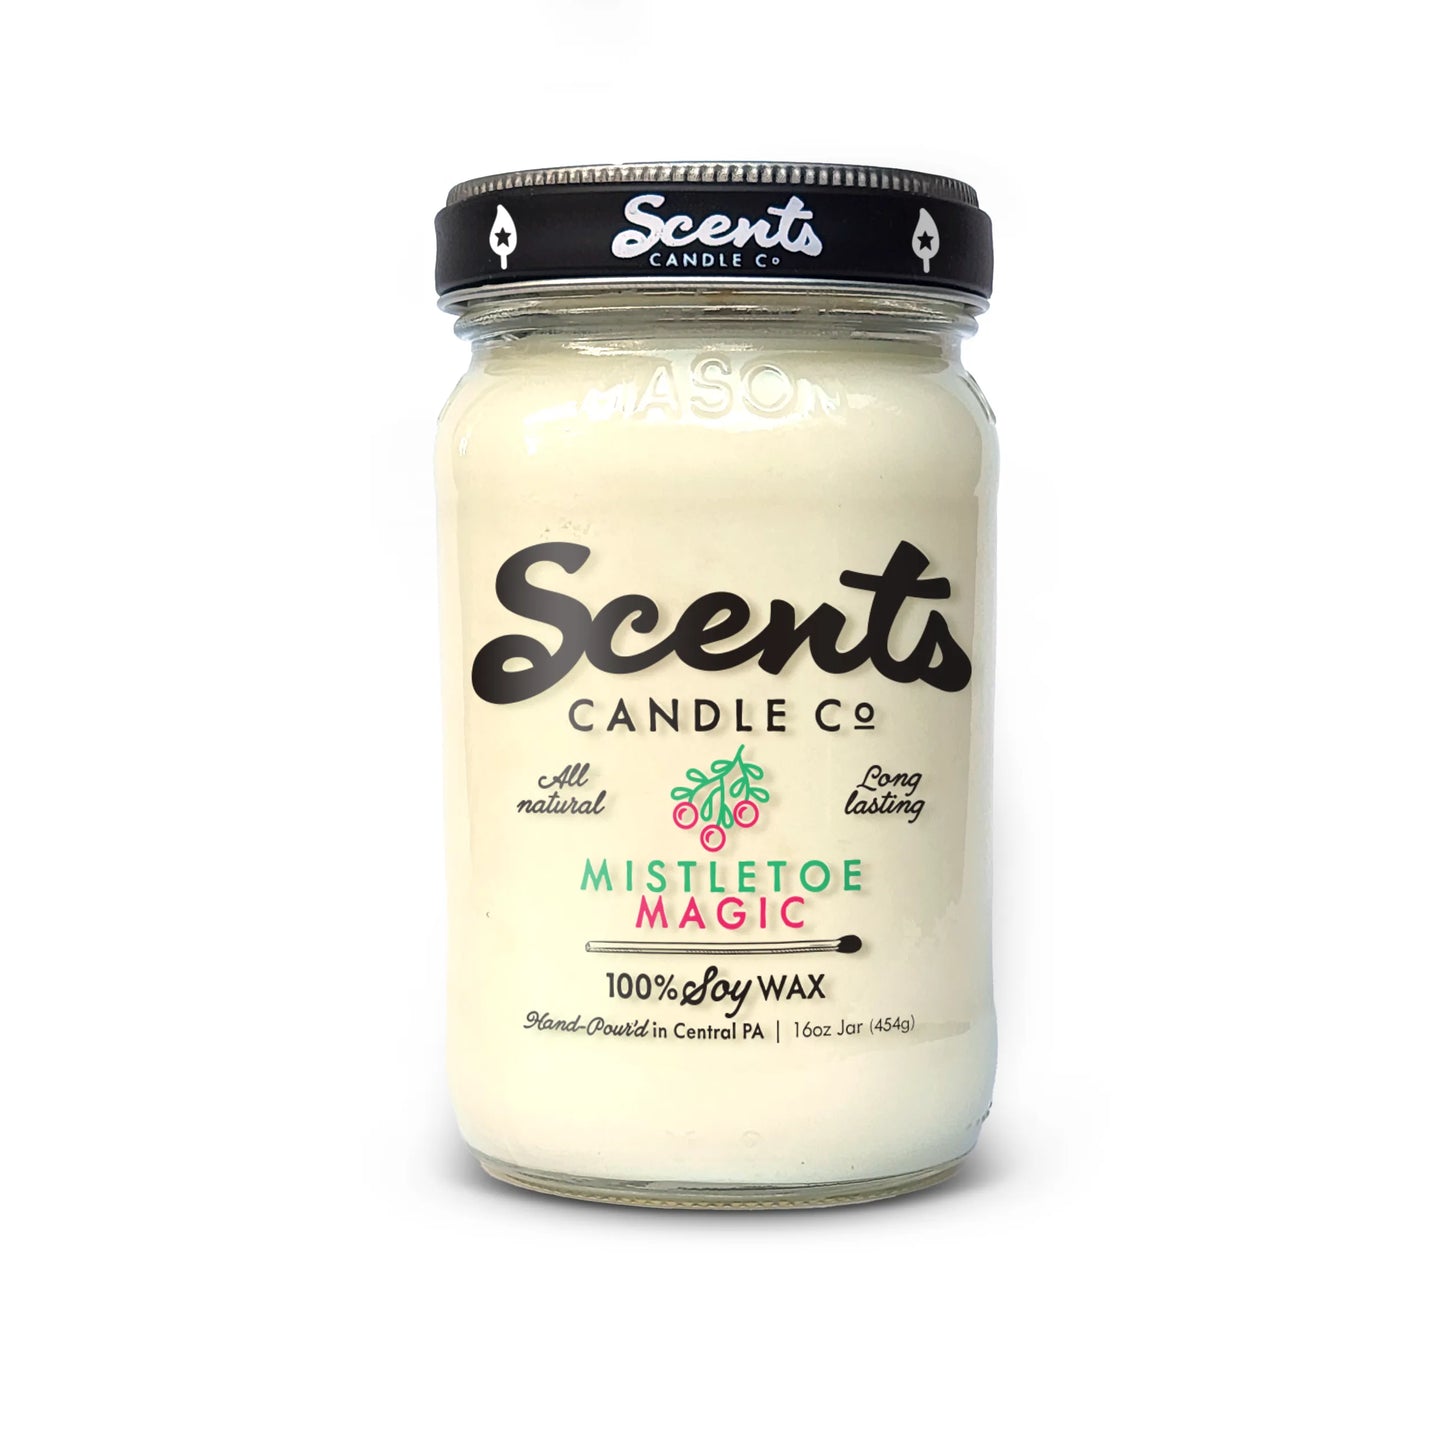 Scents Candle Co. Mistletoe Magic Soy Wax Candles